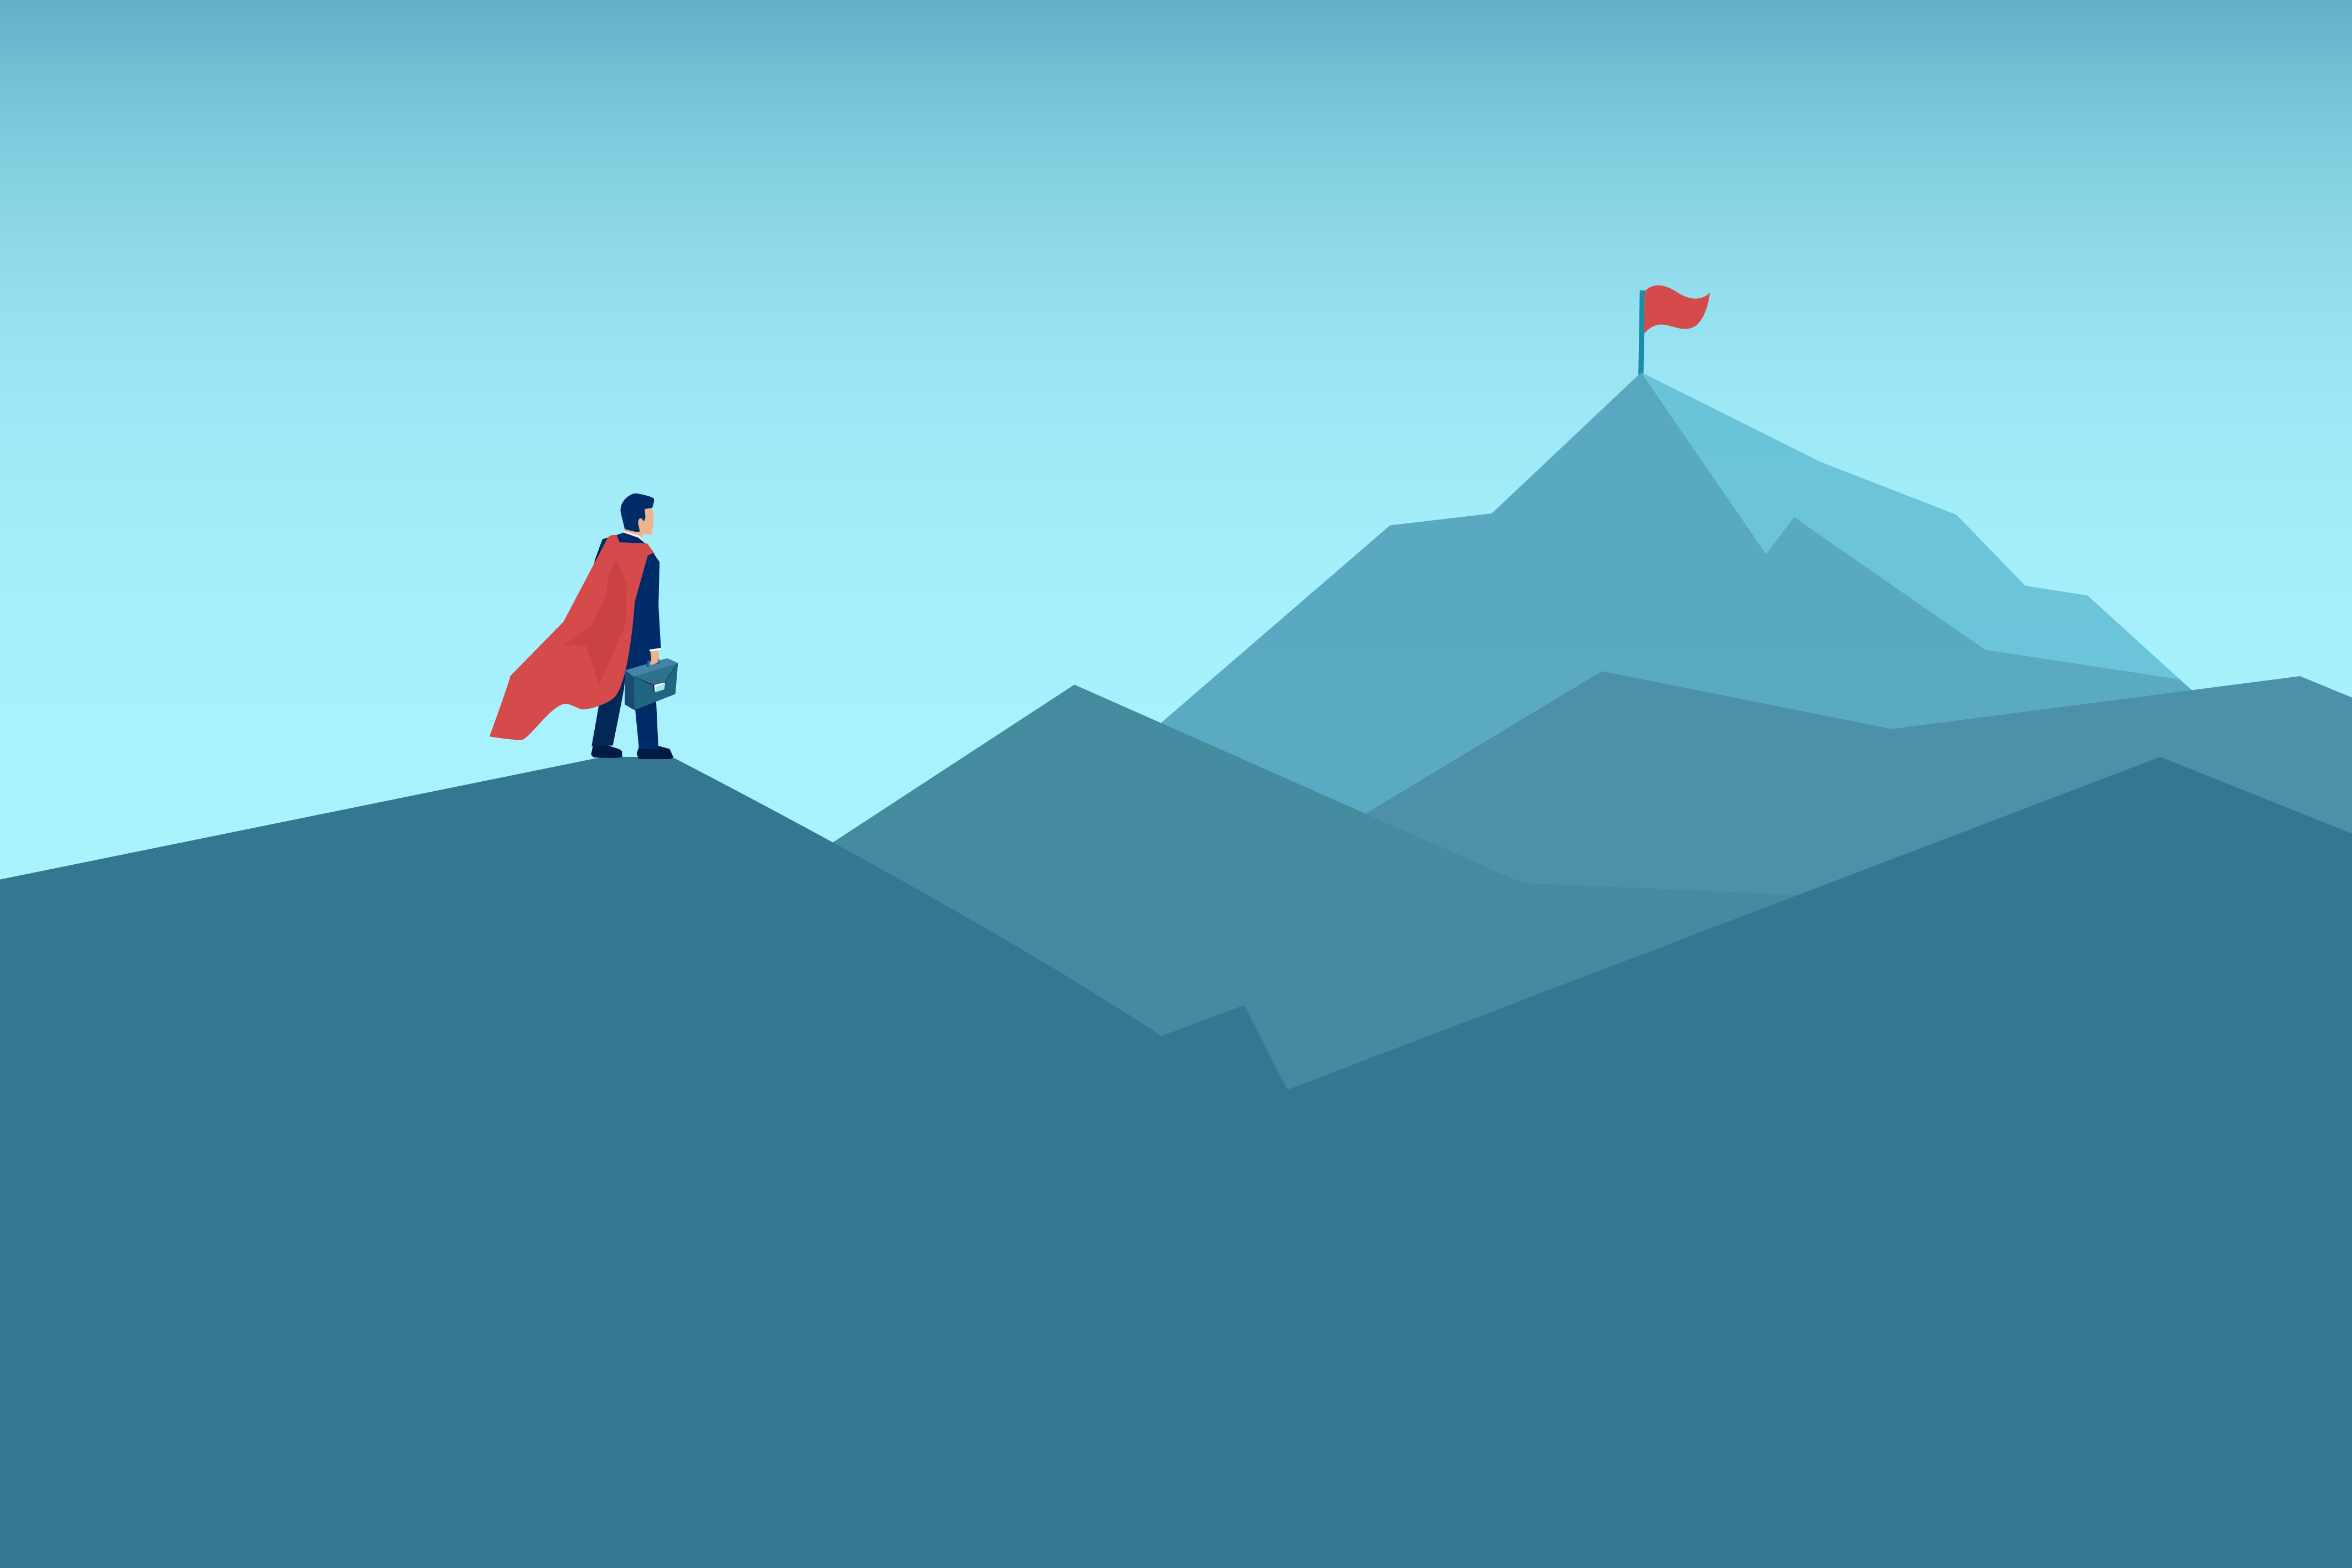 A person in a cape, embodying brand strategy, stands at the foot of a mountain peak looking towards the summit where a flag is planted.